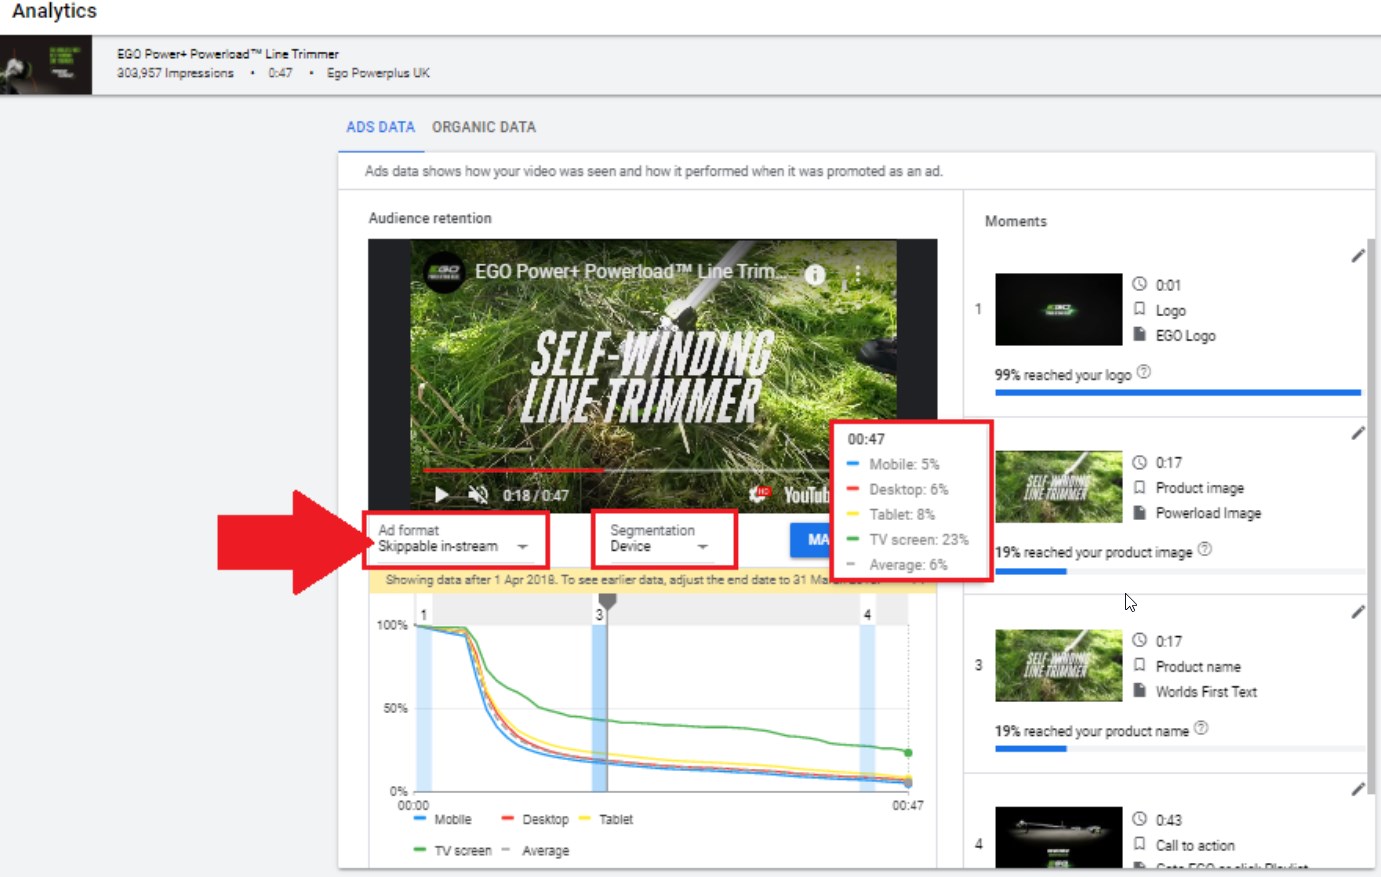 Youtube Video Ads Analytics Now Allow You to Select Ad Format and Segment with Age, Gender, Etc